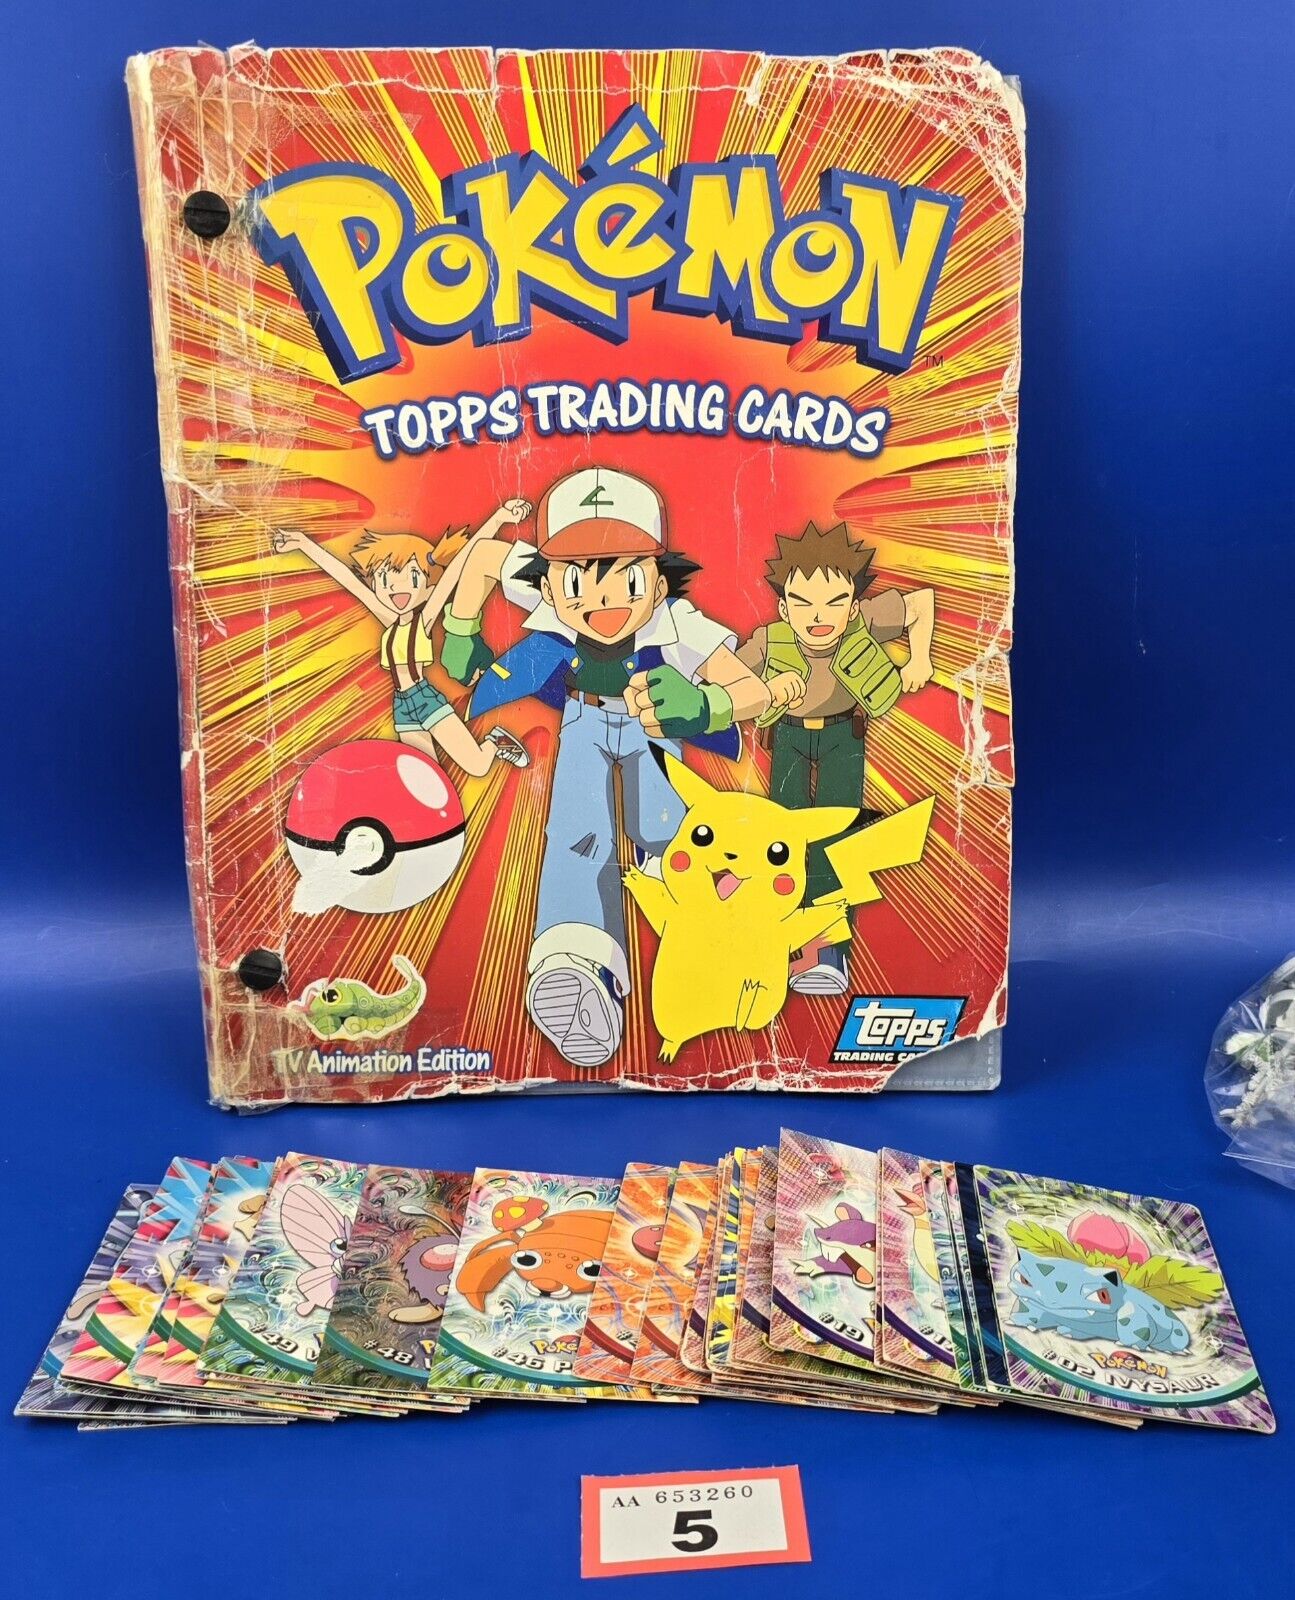 Pokemon 1990\'s Topps trading cards tv animation edition 48 cards Inc Holos